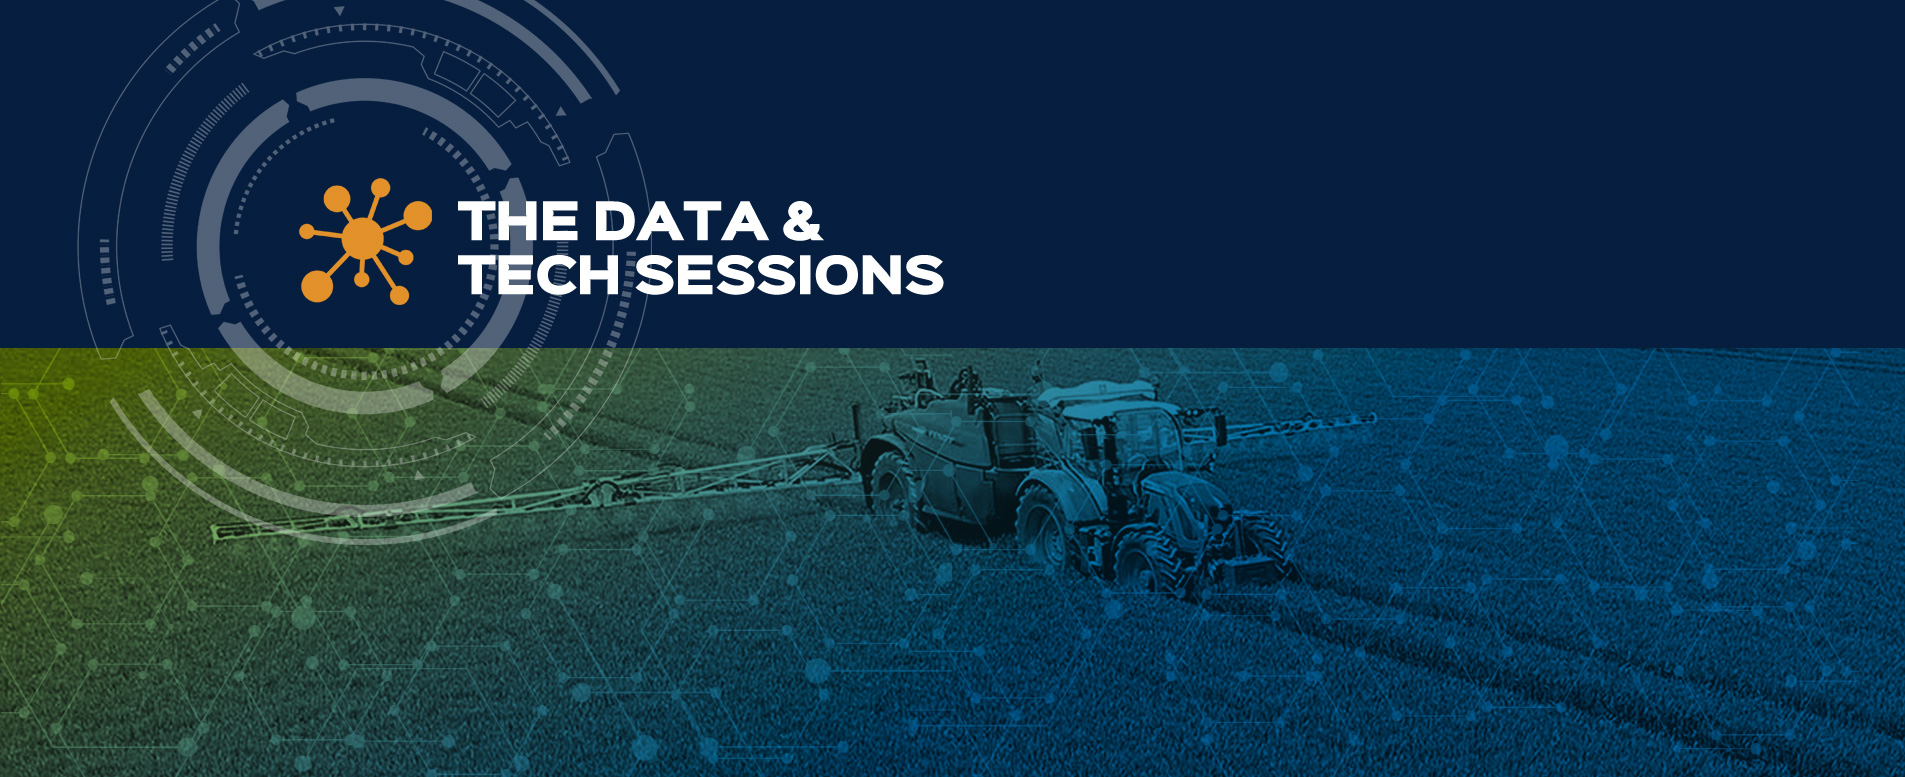 The Data & Tech Series continues with two live webinars showcasing integration with ACGO and John Deere technology